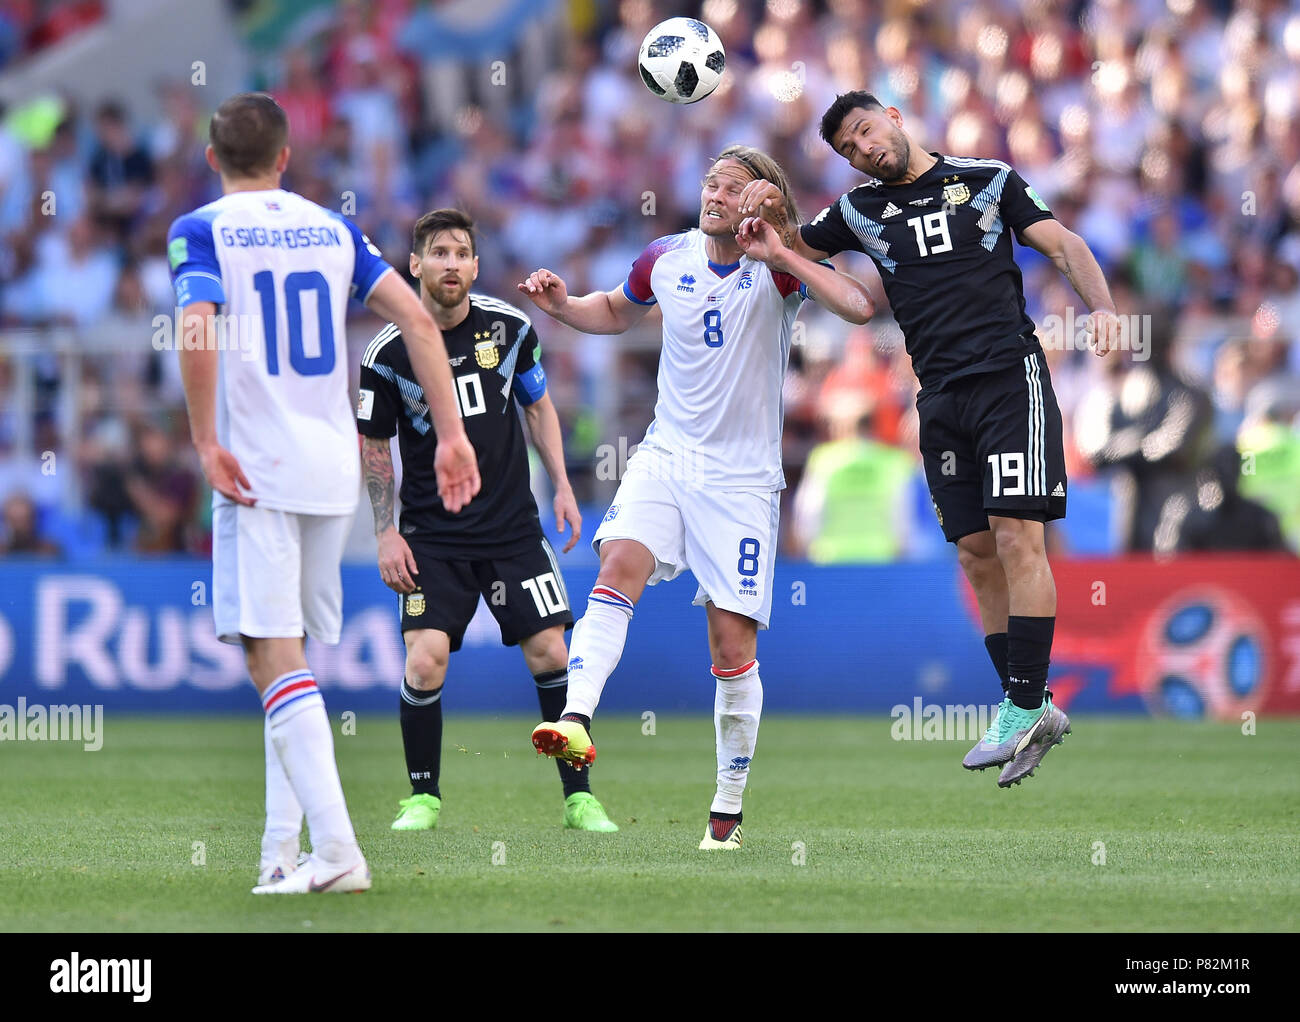 MOSCOW, RUSSIA - JUNE 16: Birkir Bjarnason of Iceland competes with Sergio Aguero of Argentina during the 2018 FIFA World Cup Russia group D match between Argentina and Iceland at Spartak Stadium on June 16, 2018 in Moscow, Russia. (Photo by Lukasz Laskowski/PressFocus/MB Media) Stock Photo